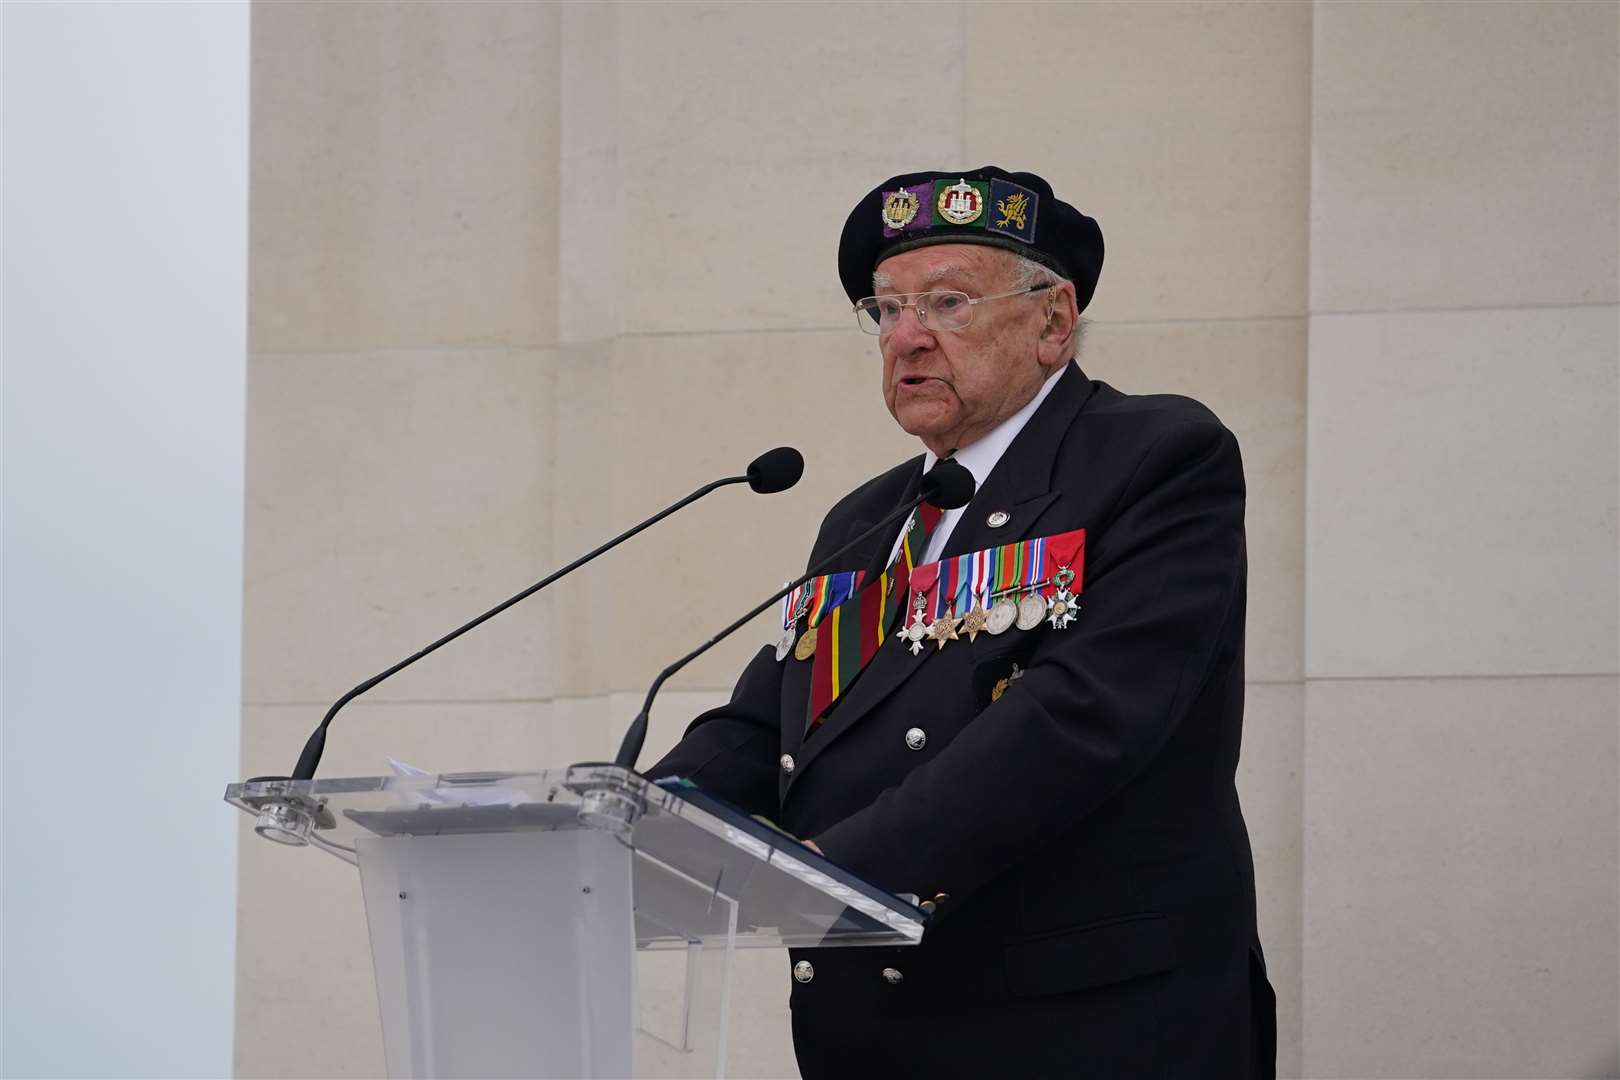 D-Day veteran Ken Hay will visit Rush Green Primary School in Romford, where he will give a lunchtime assembly (Gareth Fuller/PA)